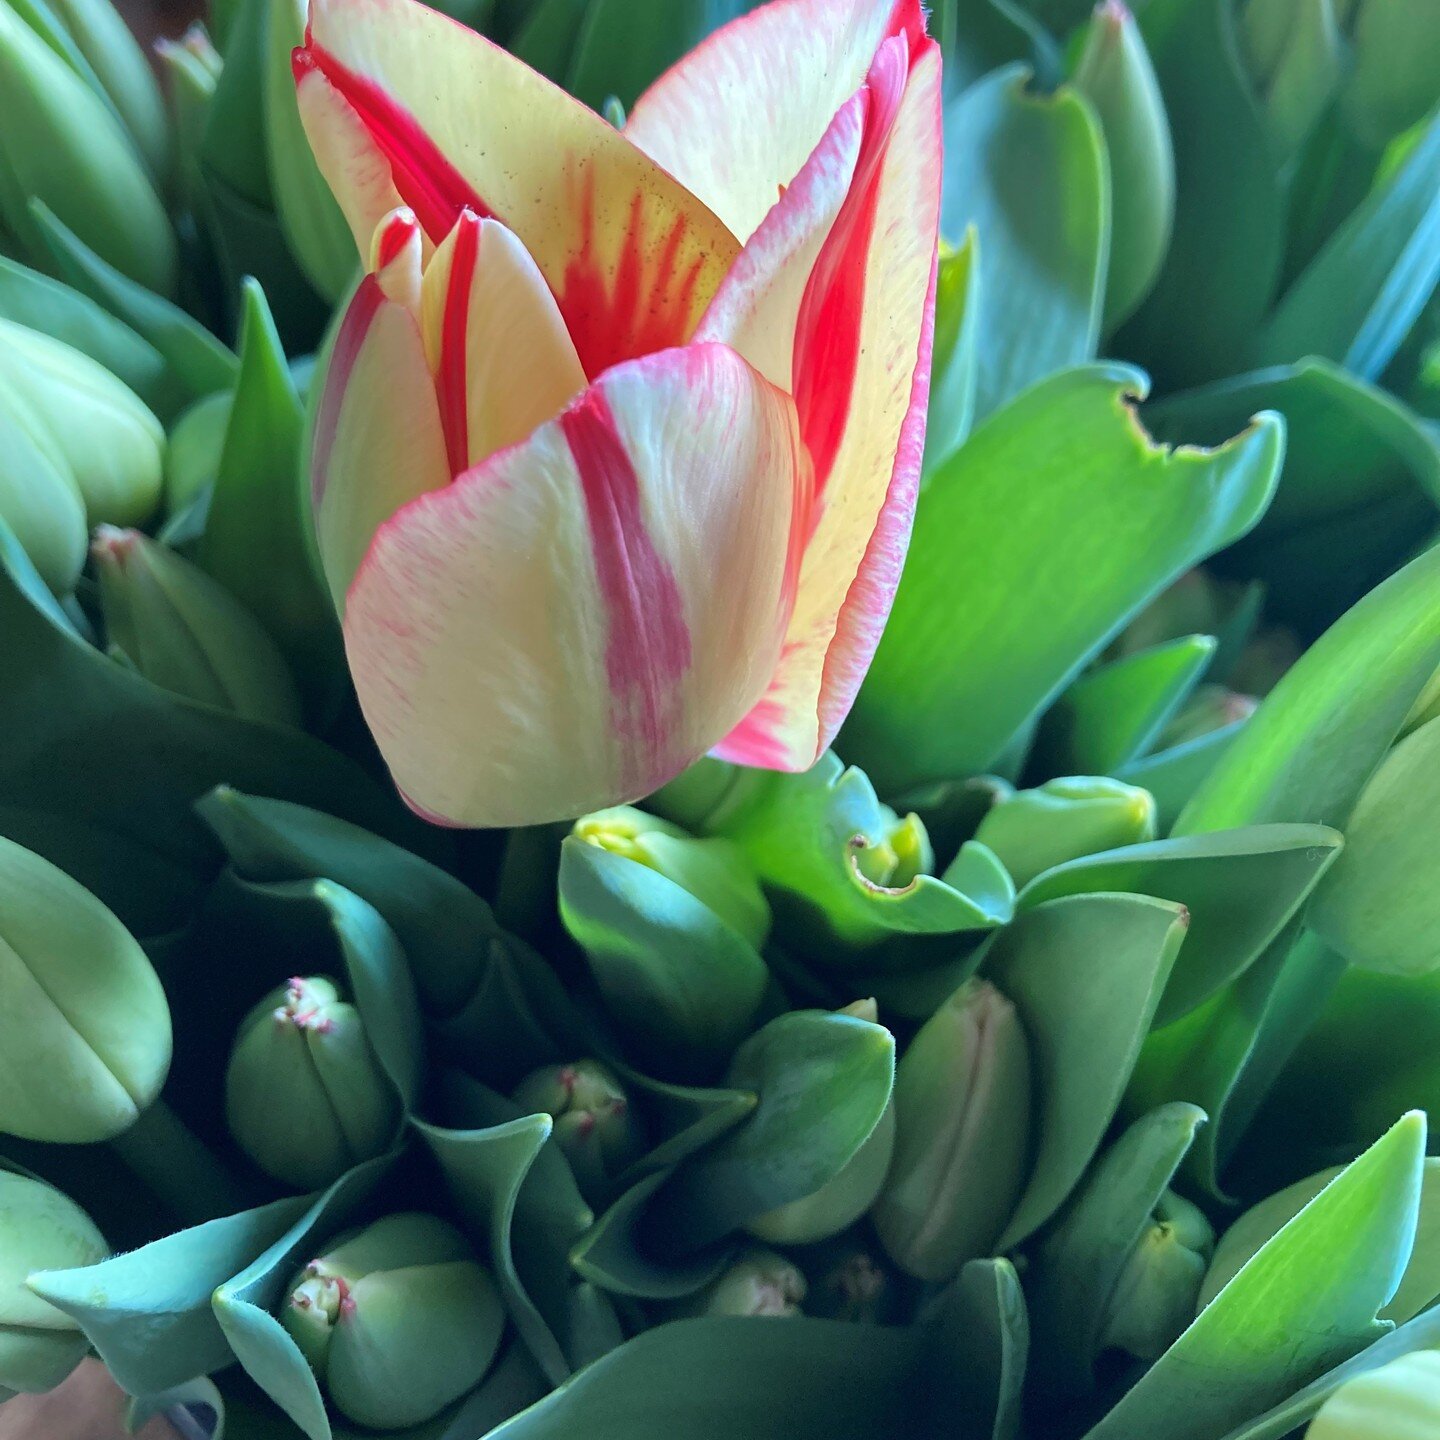 ARK Floral will have tulips for you this Saturday at the Market, open 10 am to 2 pm. 

#tulips #farmersmarket #cooperstown